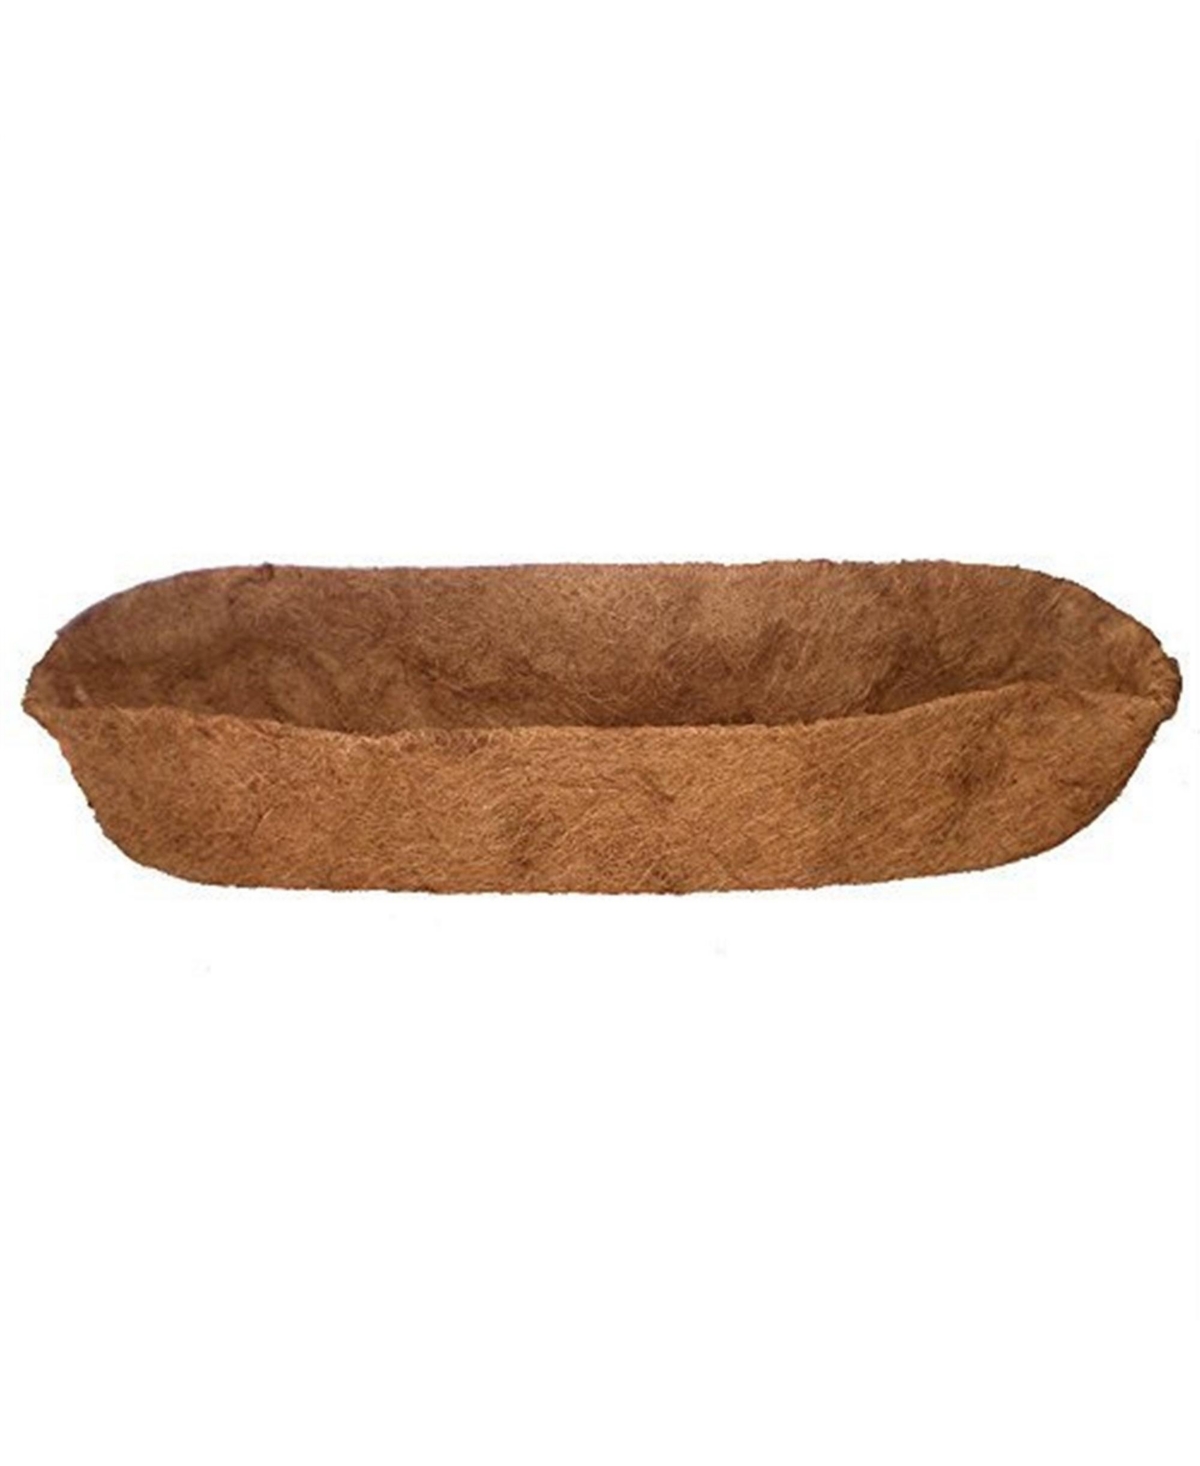 Coconut Arts Forge Trough Shaped Coco Liner, 48-Inch - Brown